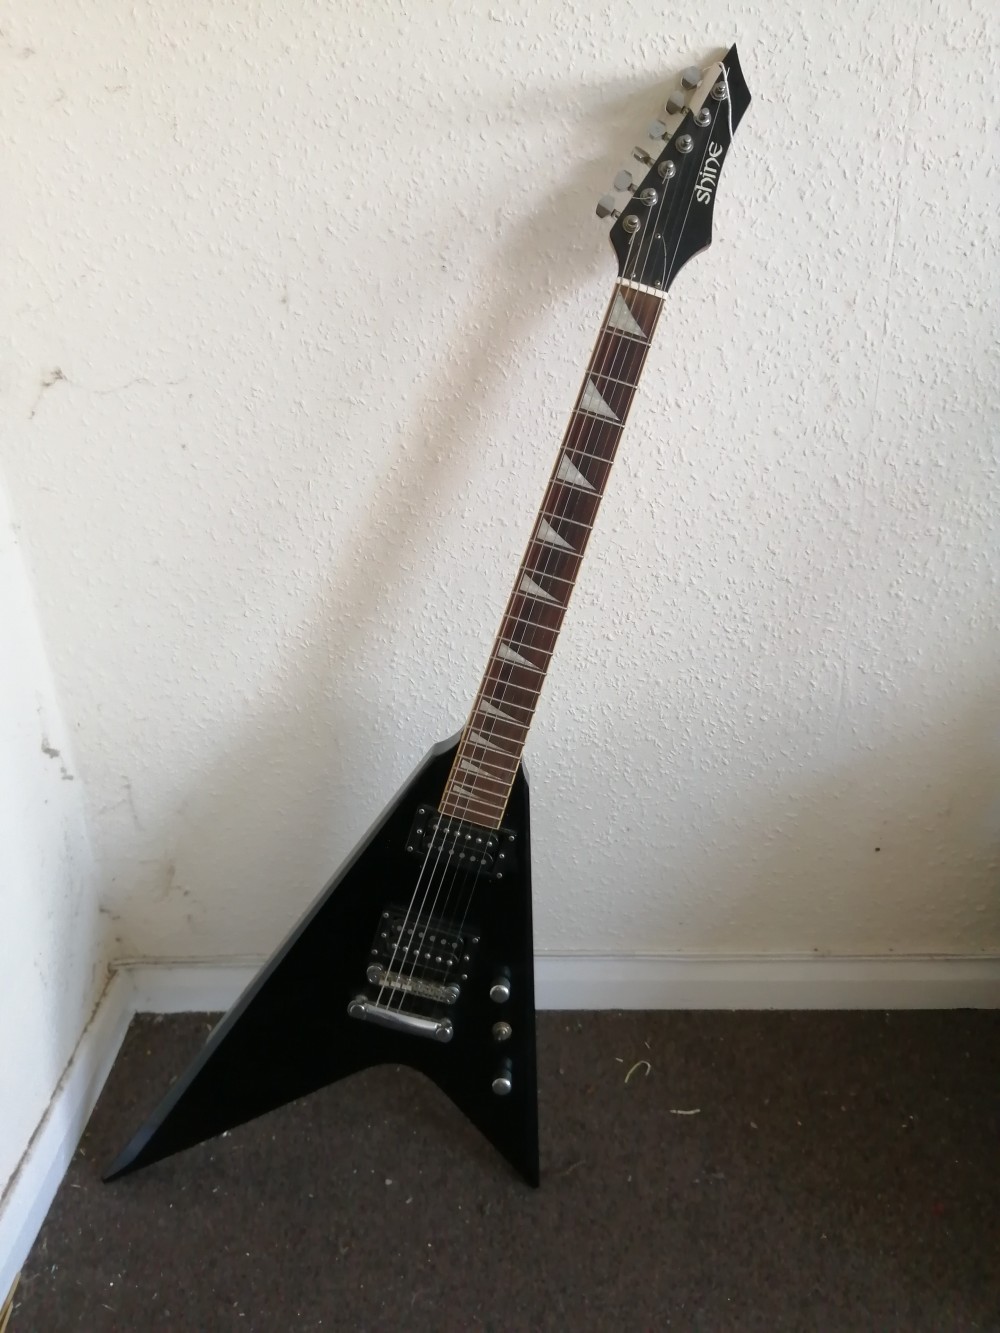 A Shine Offset Flying-V style electric guitar